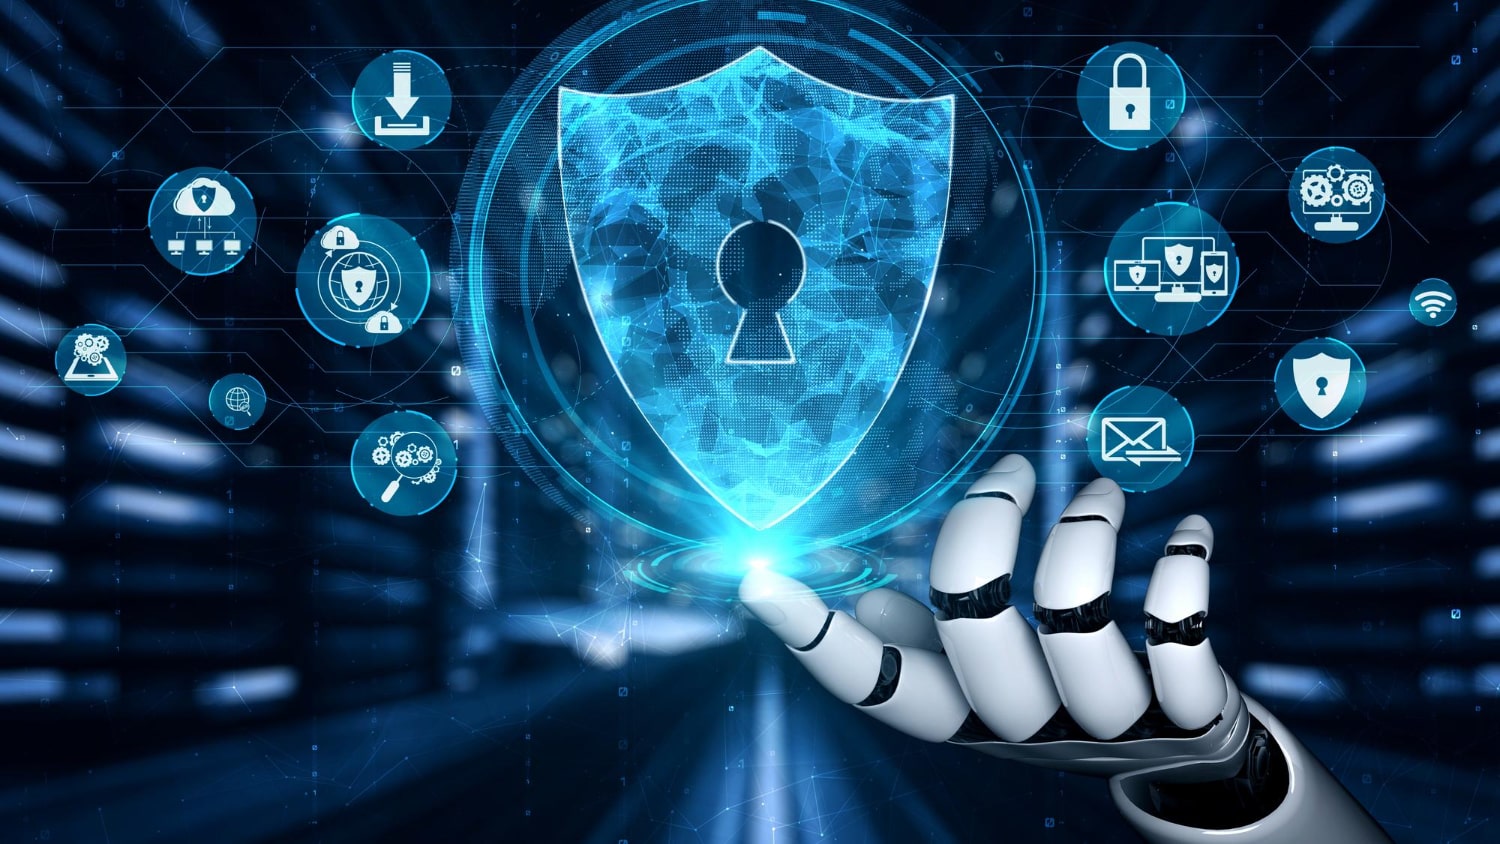 RPA Services and Cybersecurity Protecting Your Enterprise’s Data